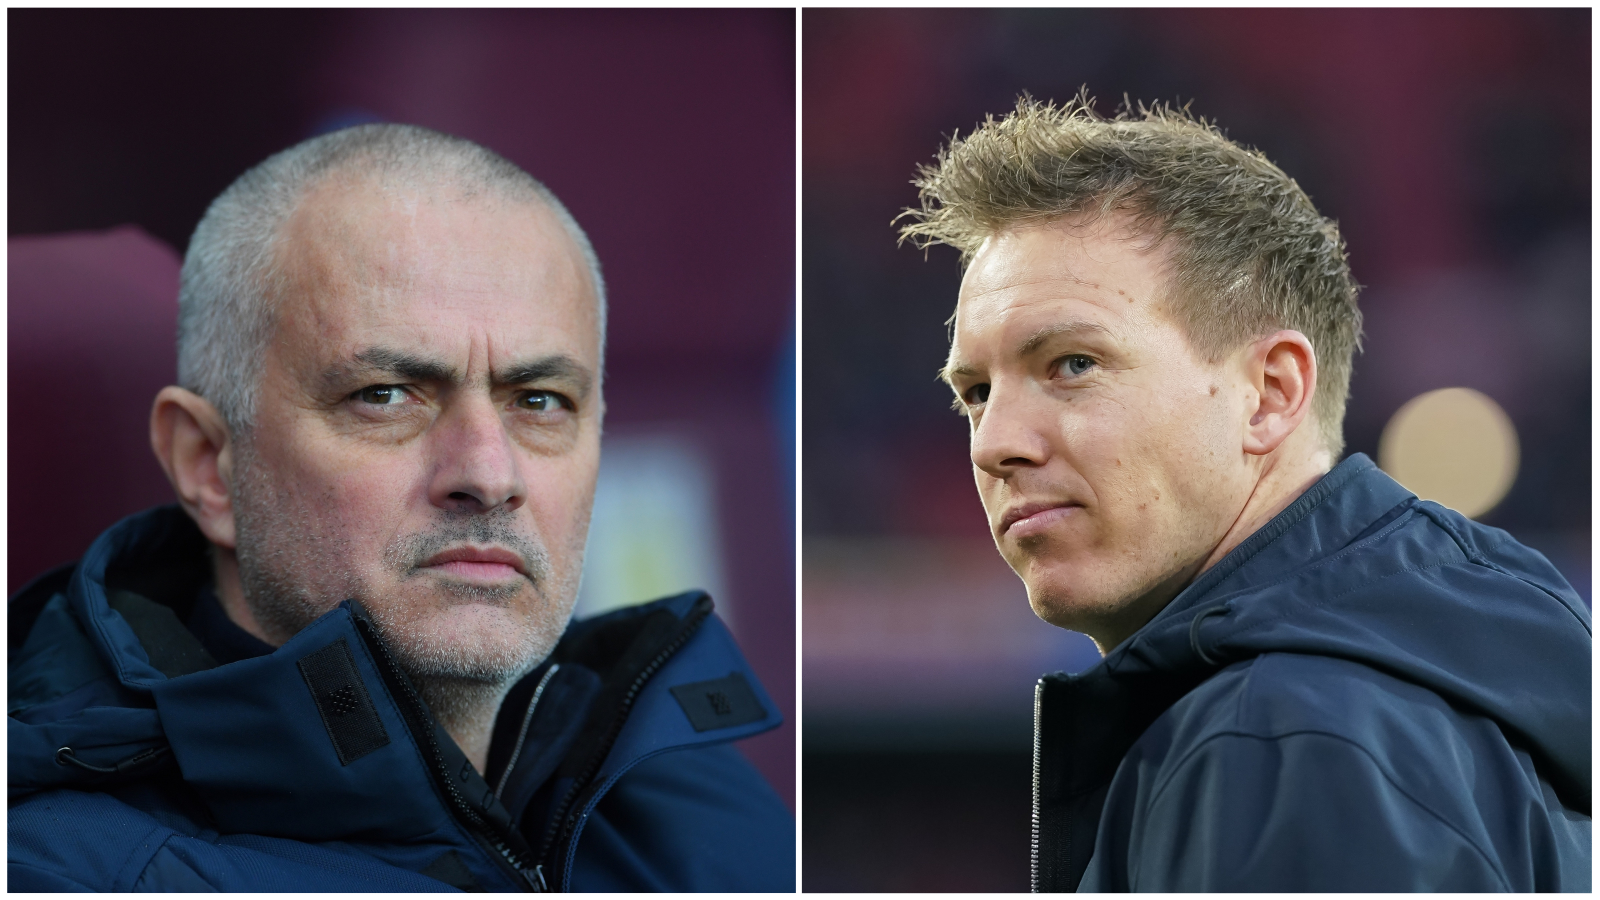 Julian Nagelsmann got one over on Jose Mourinho, who is 25 years his senior.